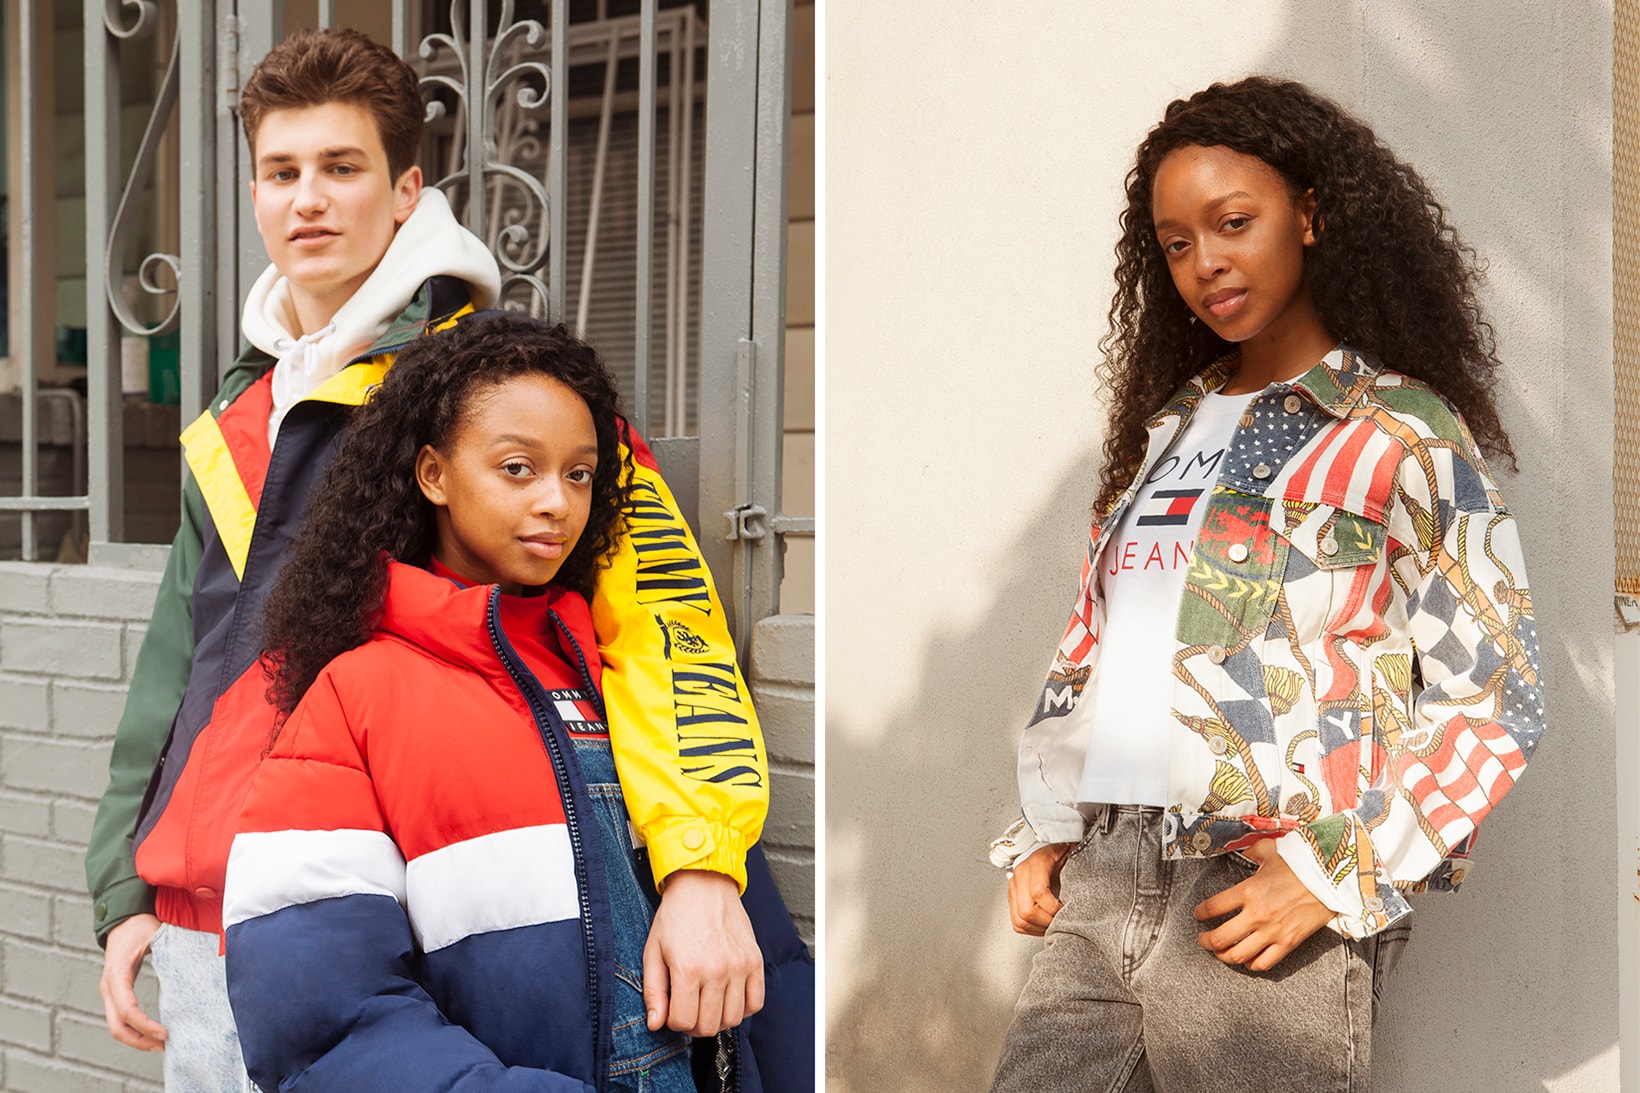 Tommy Hilfiger Draws Influence From the 90s in New Tommy Jeans